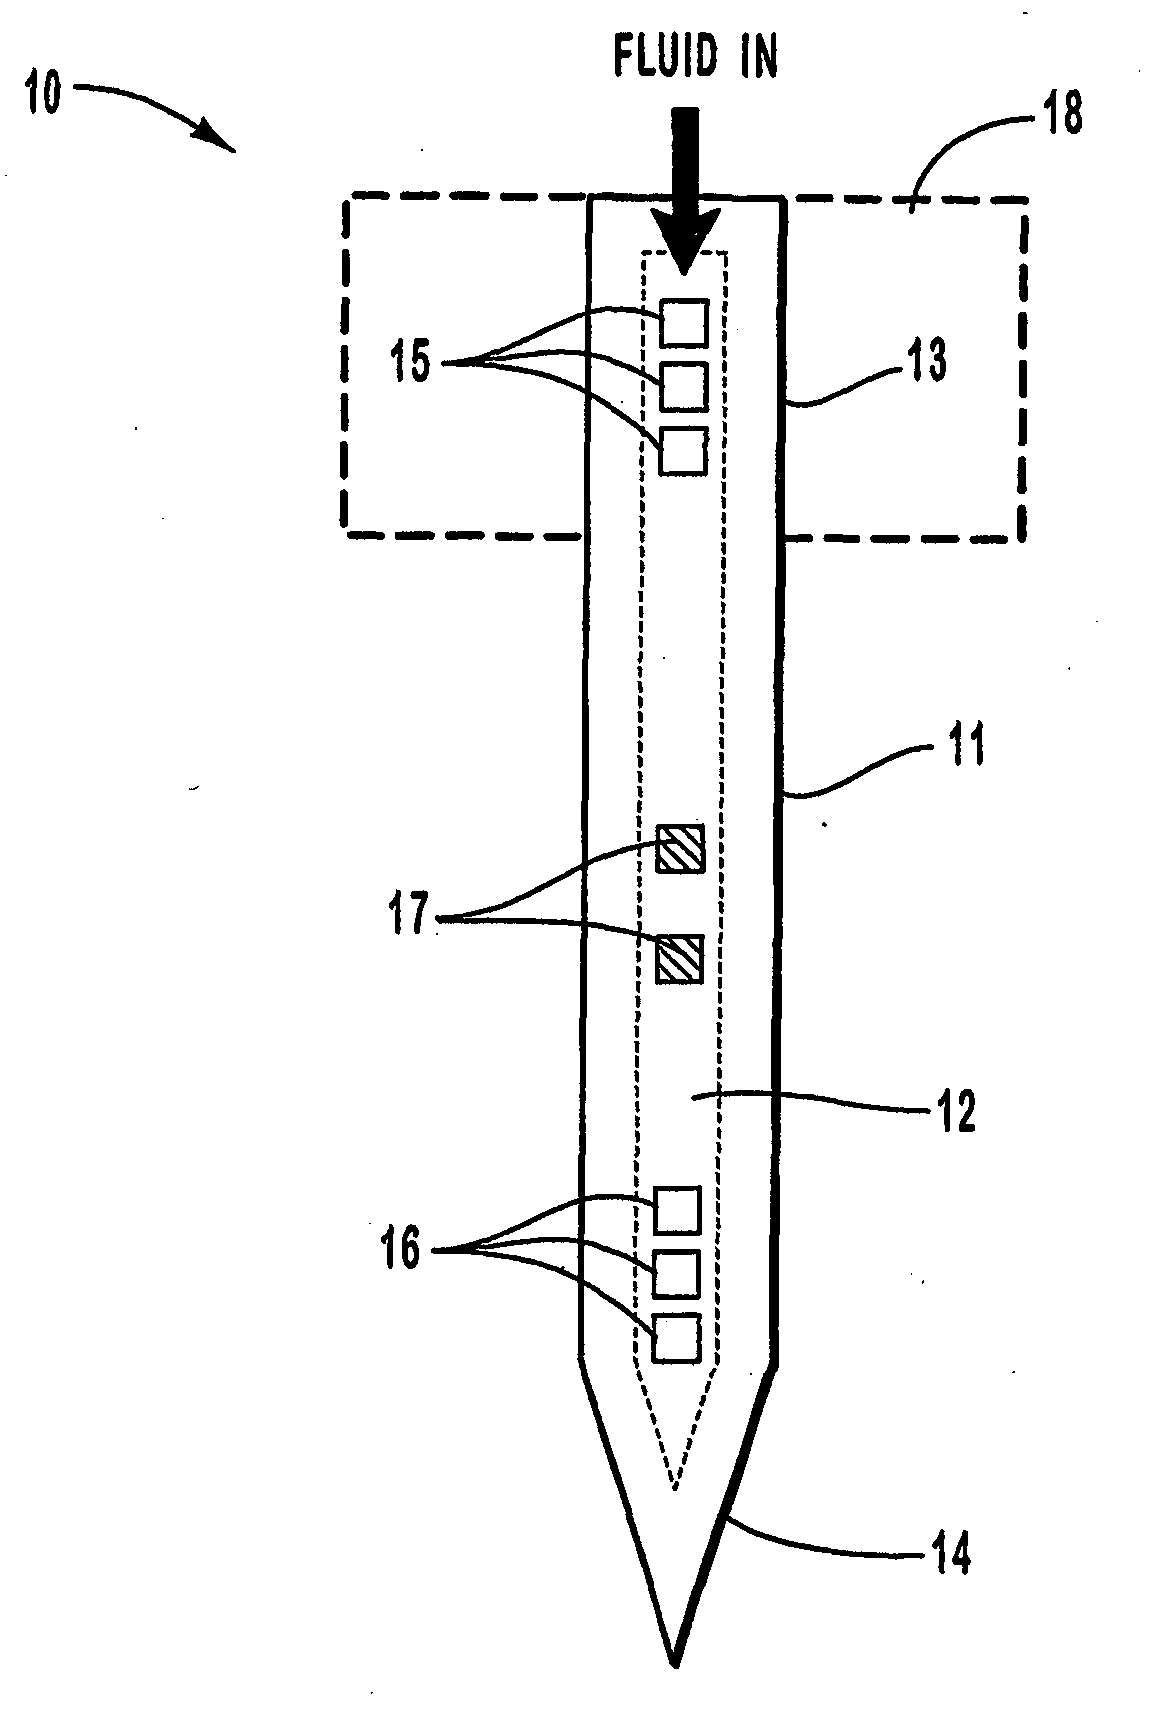 Active needle devices with integrated functionality